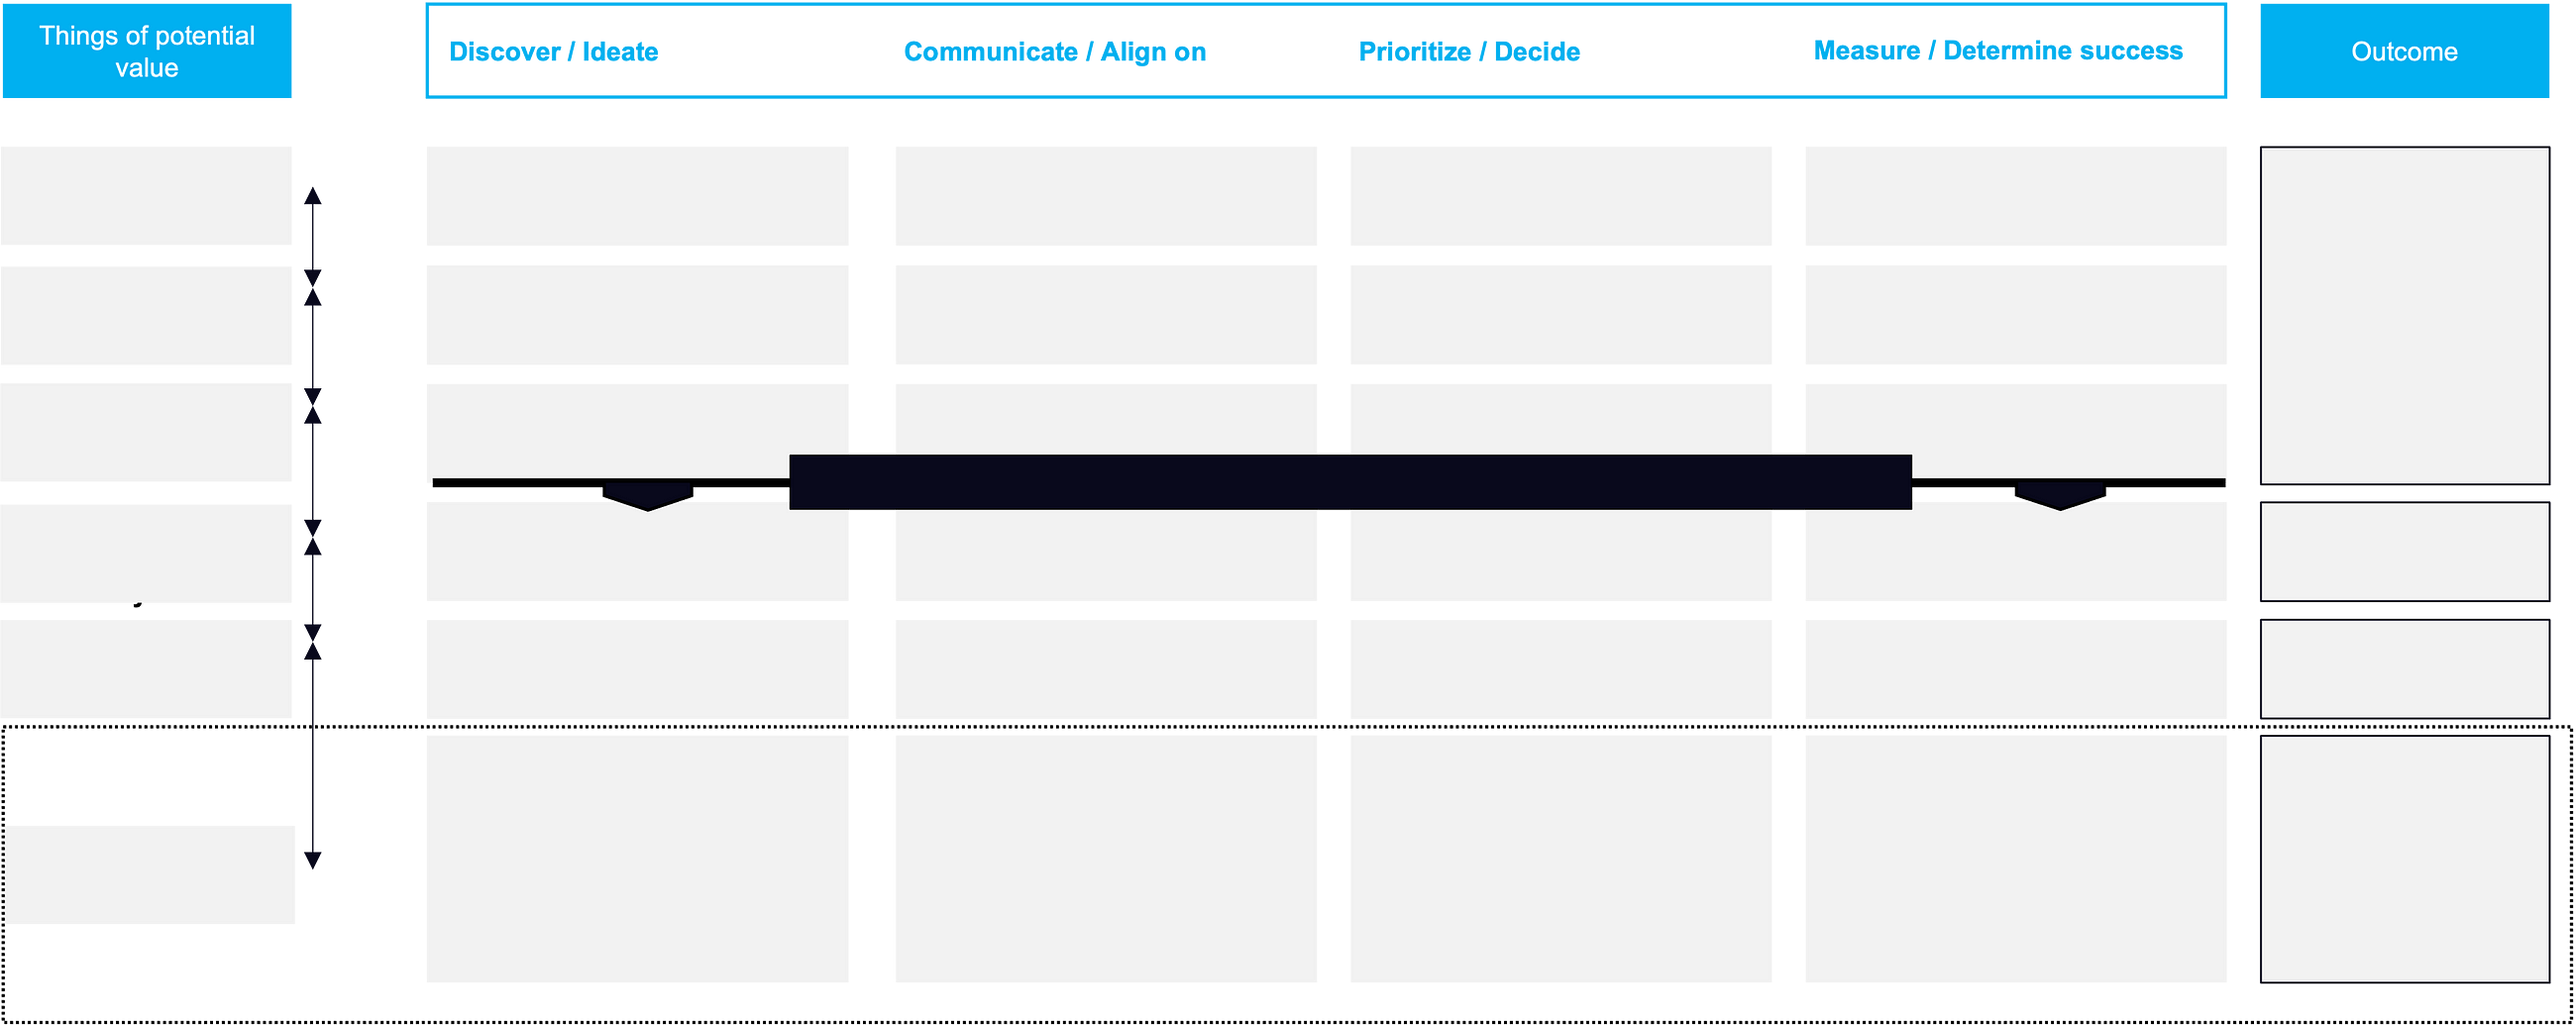 Sneak peak of the Product Management Operating Model canvas